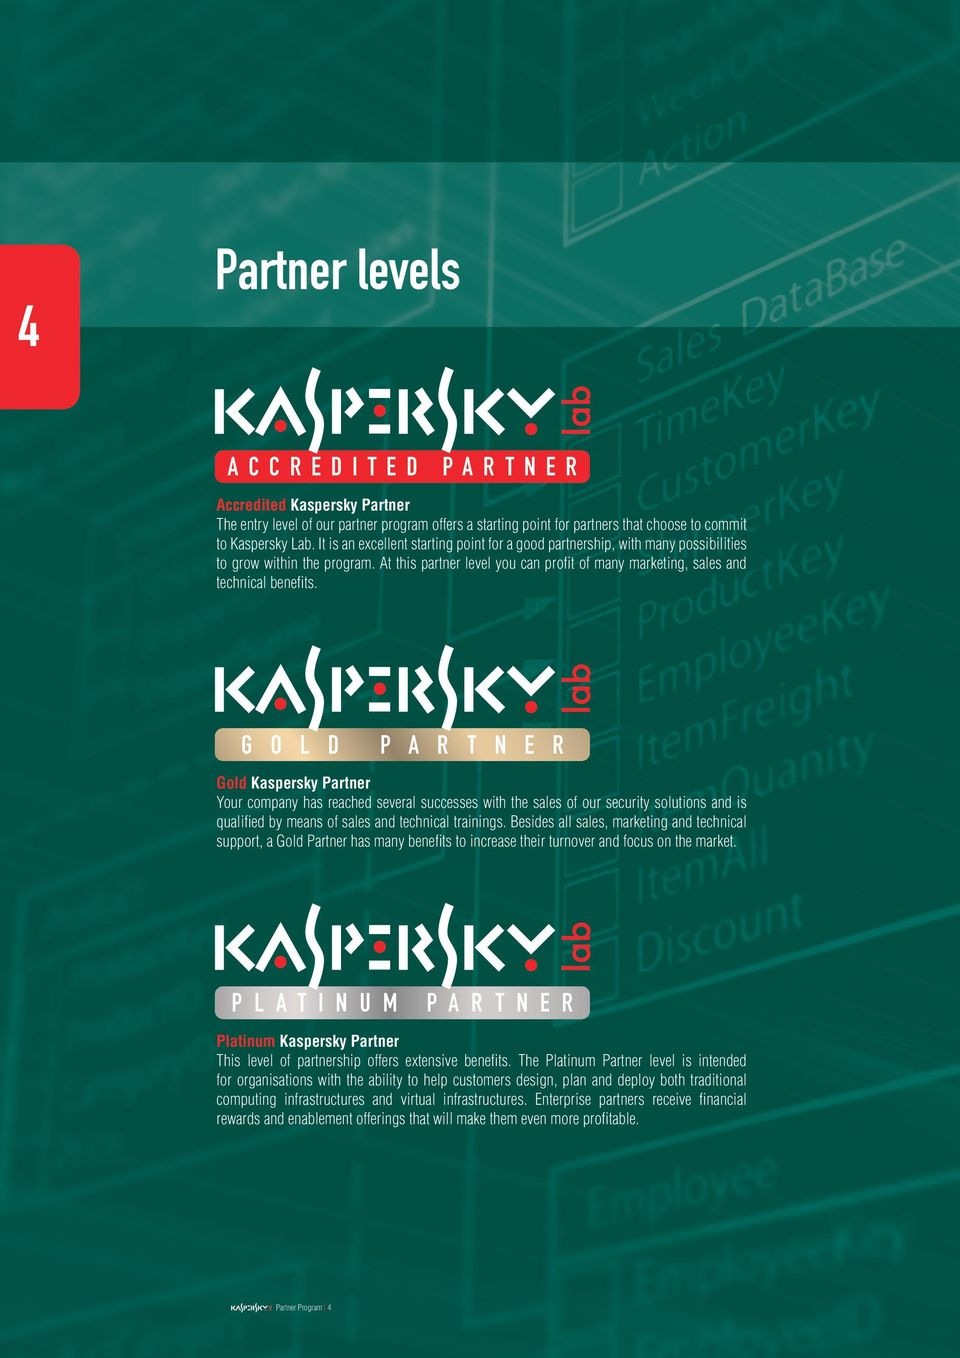 G O L D P A R T N E R Gold Kaspersky Partner Your company has reached several successes with the sales of our security solutions and is qualified by means of sales and technical trainings.